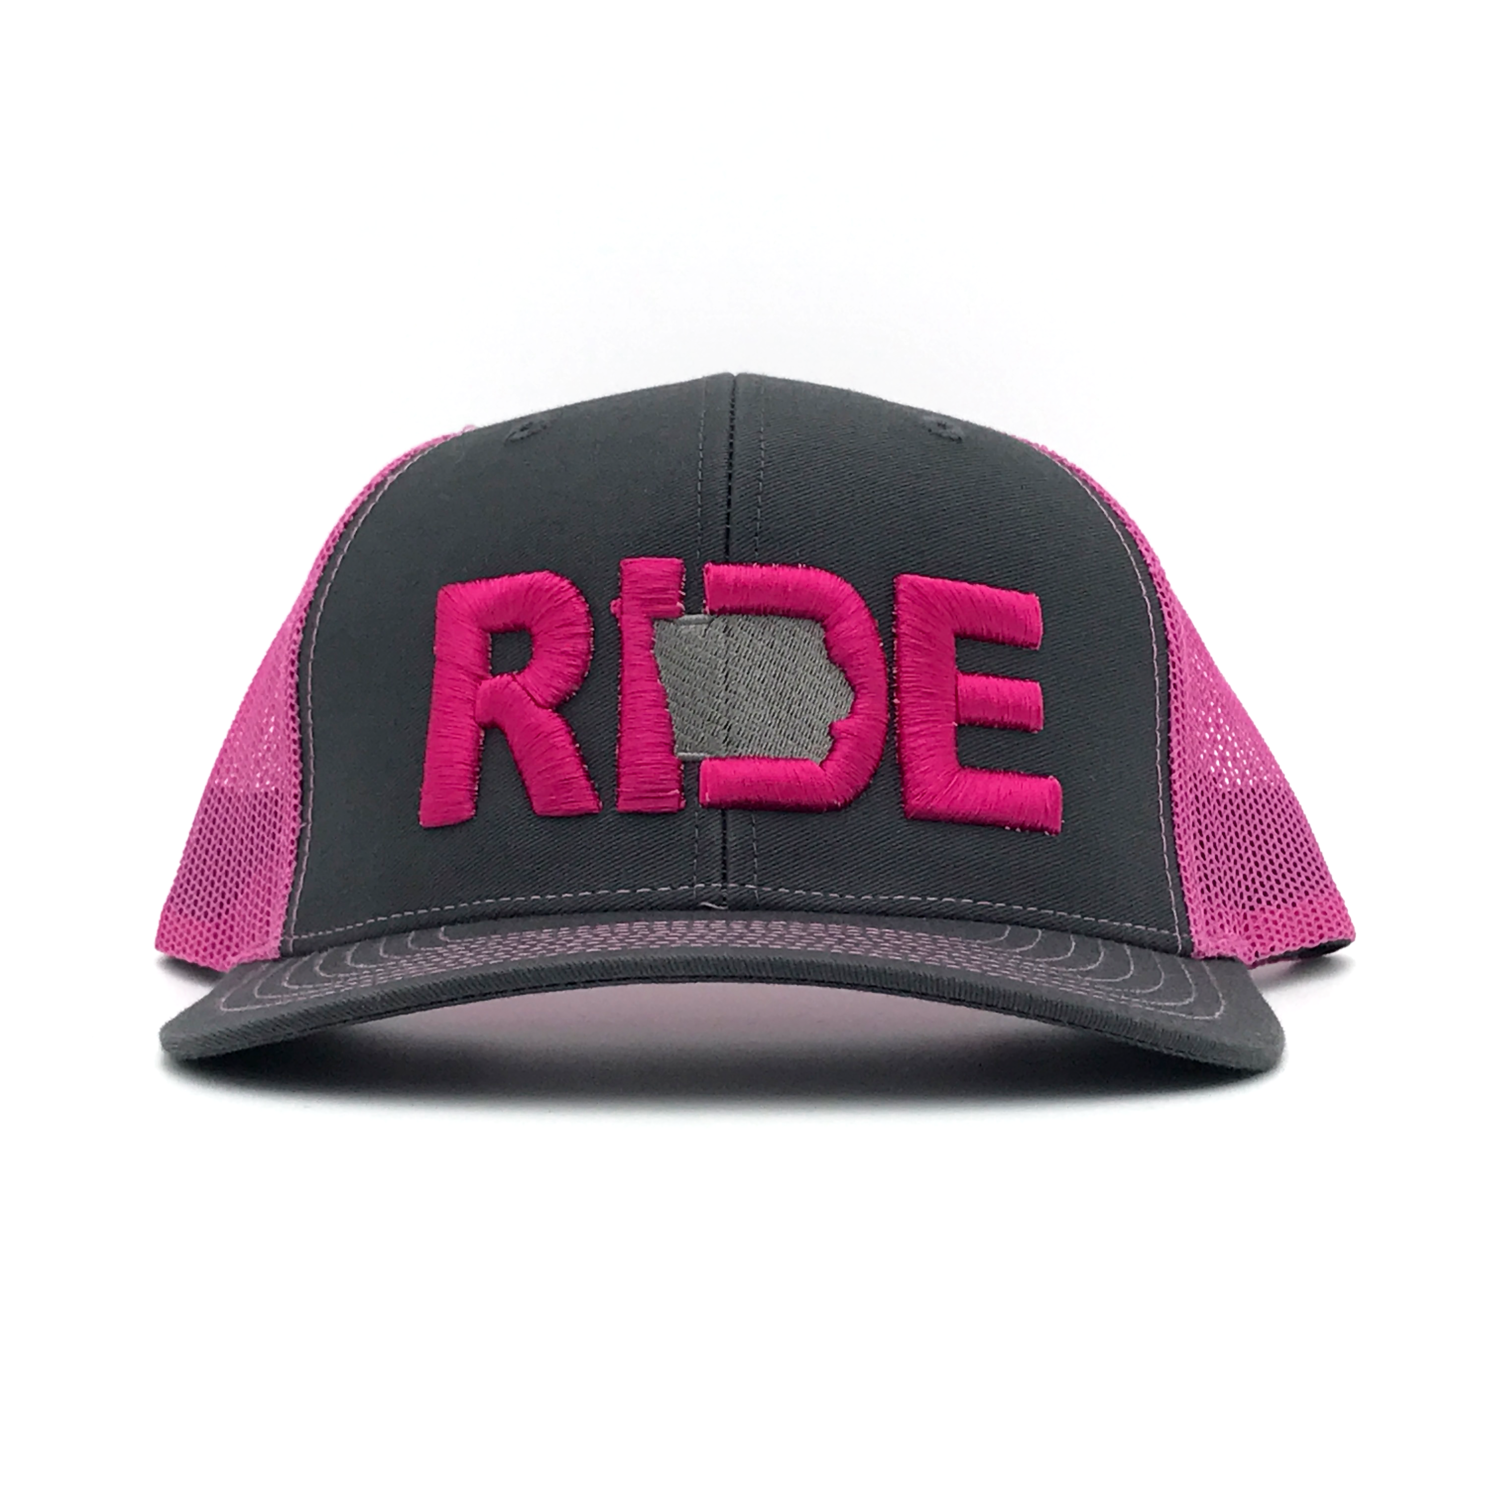 Ride Iowa Classic Embroidered Snapback Trucker Hat Gray/Pink